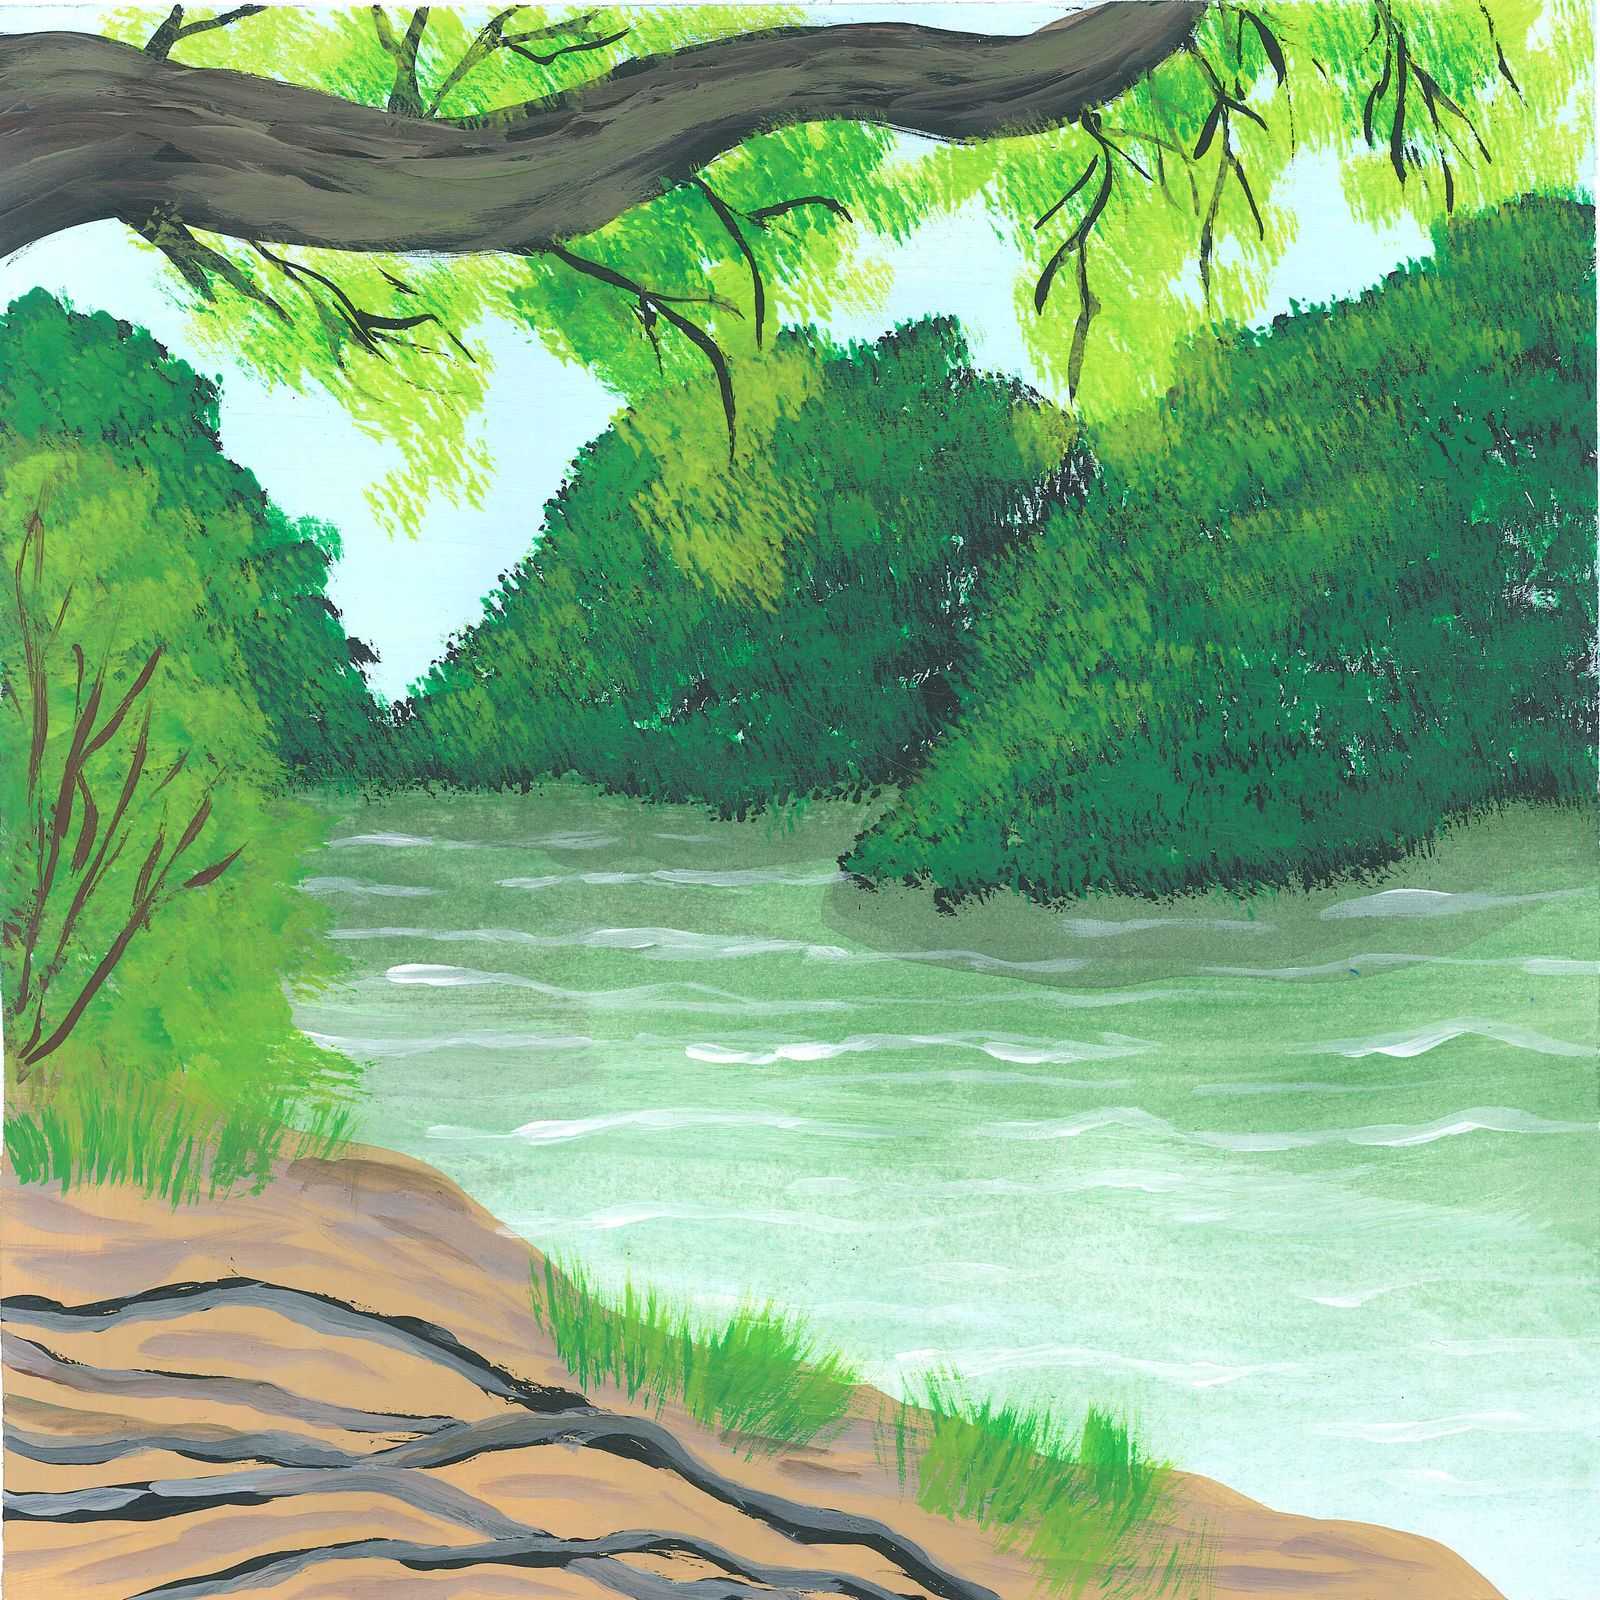 Dawn on the Luangwa River - nature landscape painting - earth.fm